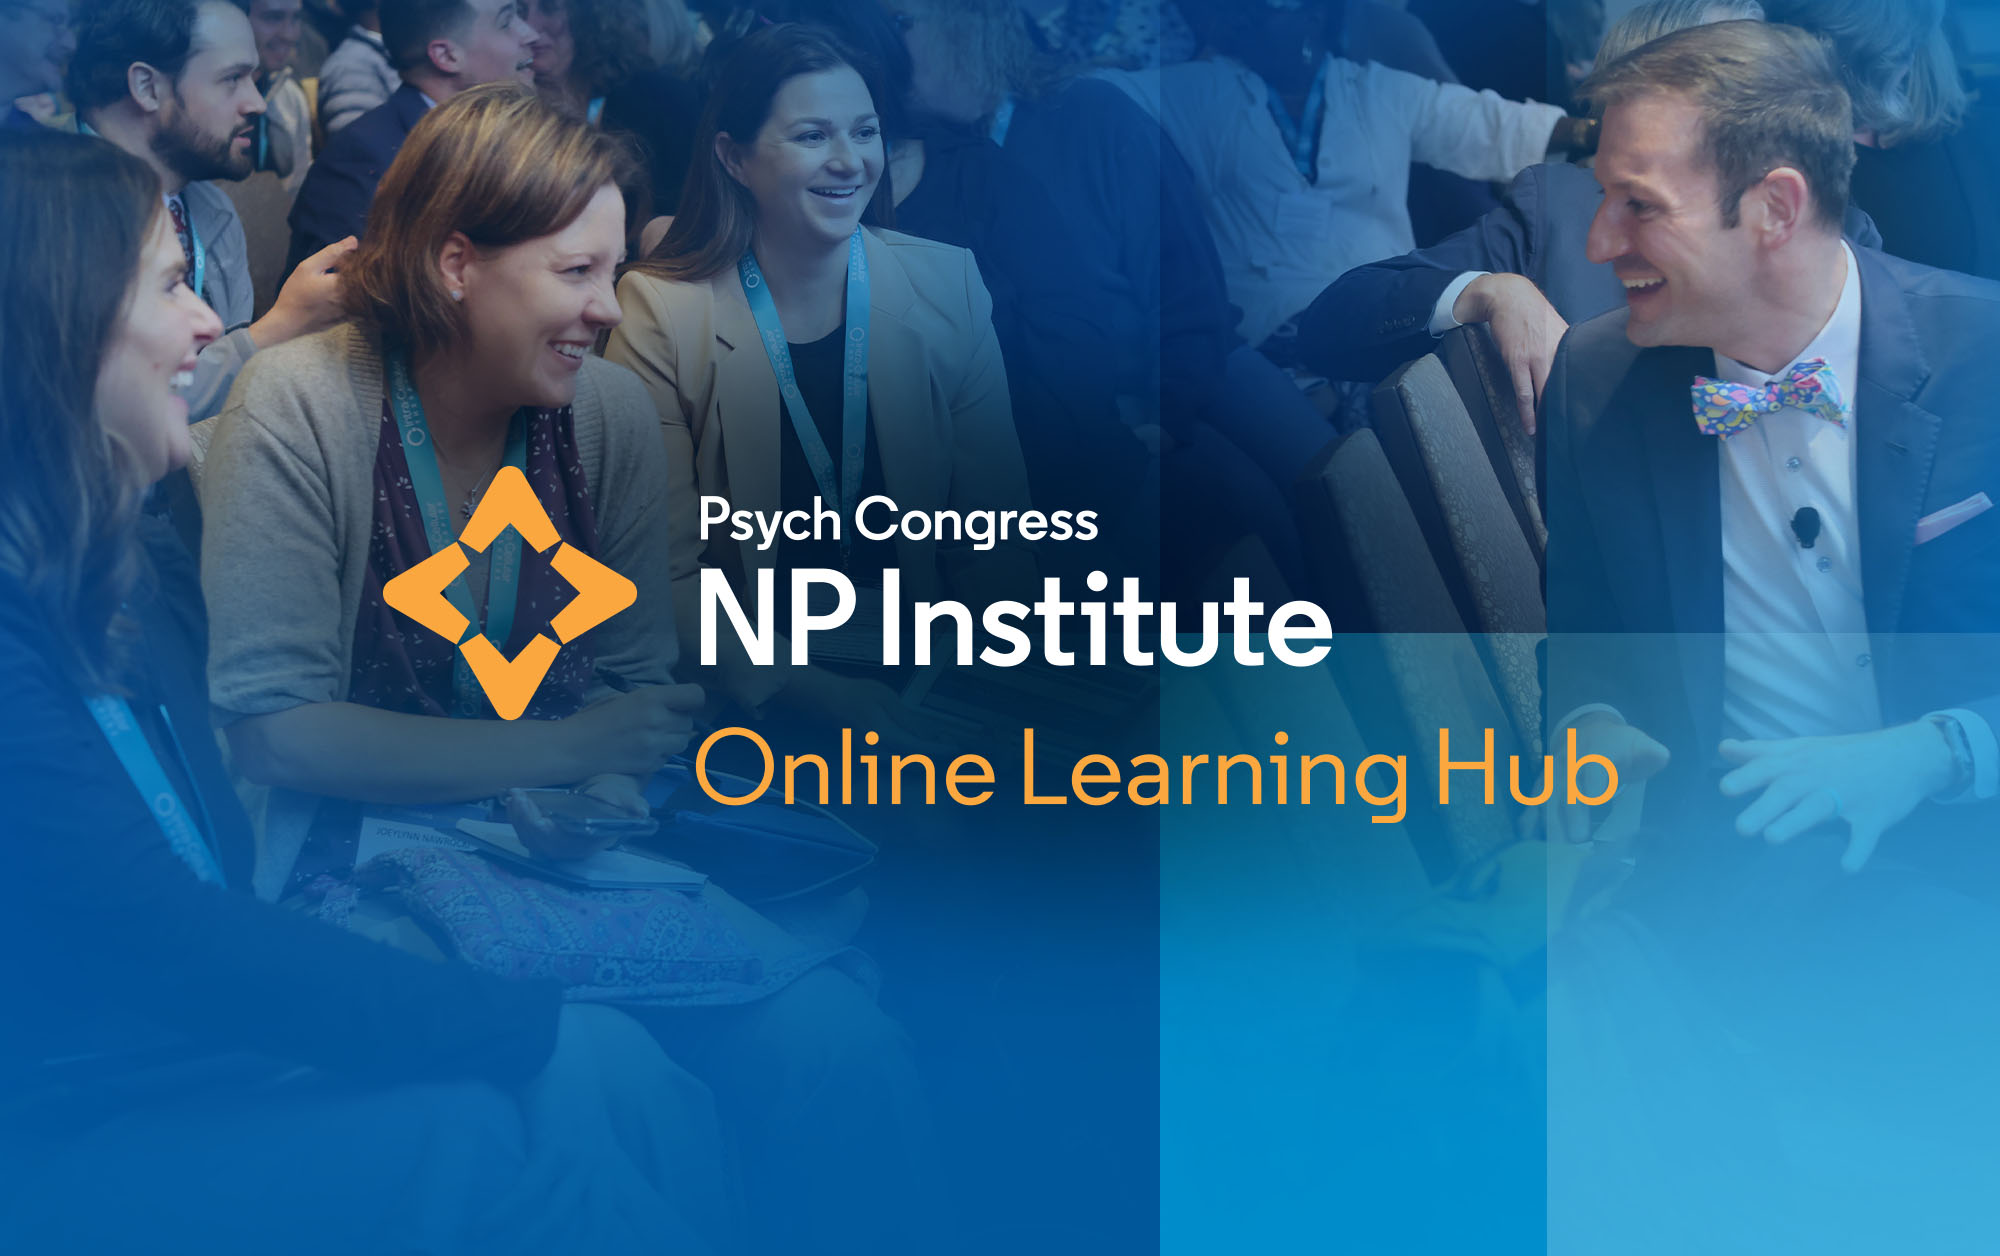 NP Institute Online Learning Hub